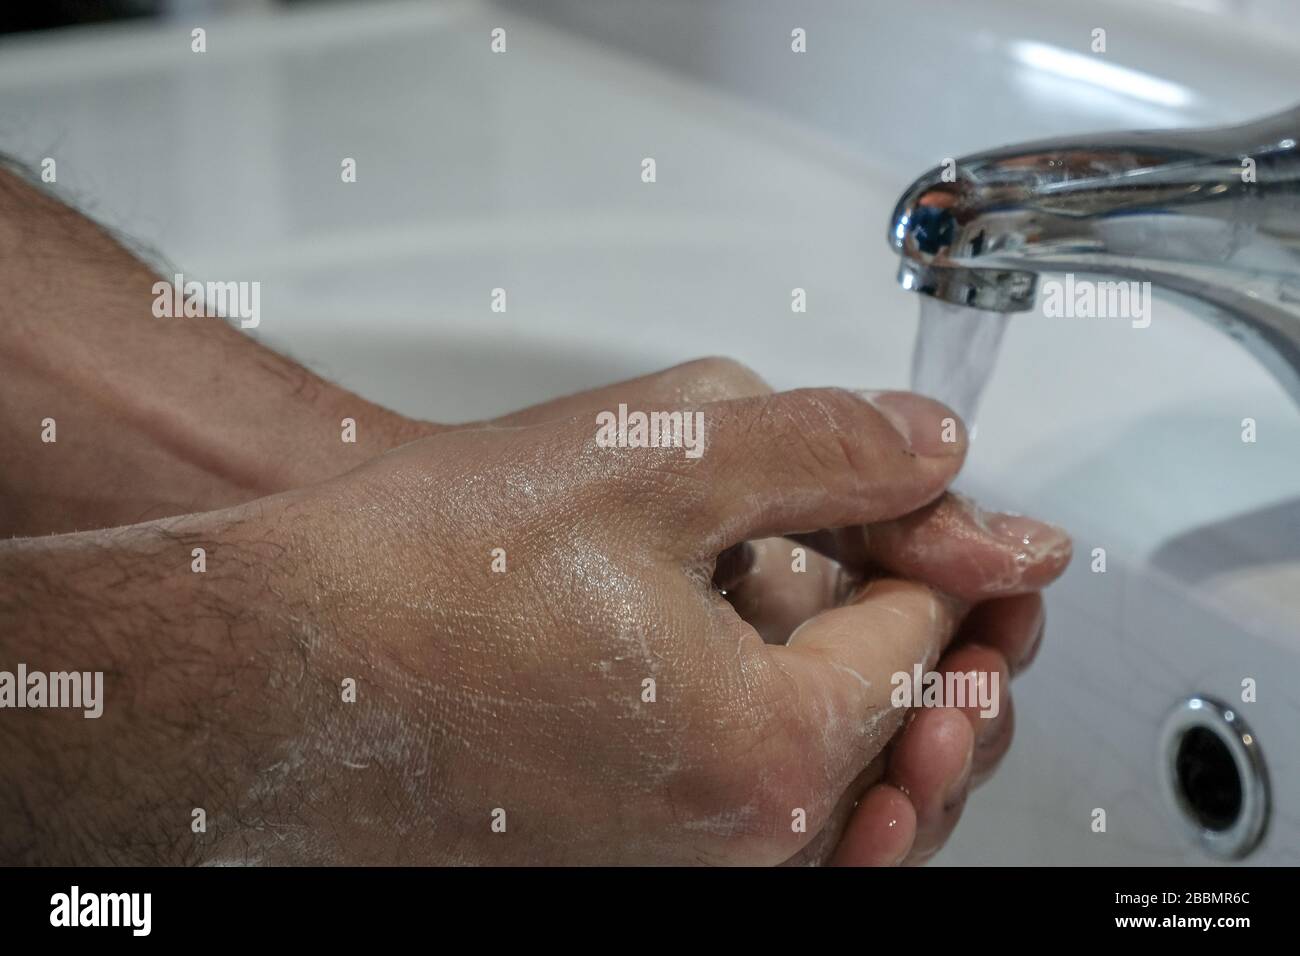 Wash hands for covid-19 virus disinfection,clean health care medical,coronavirus Stock Photo